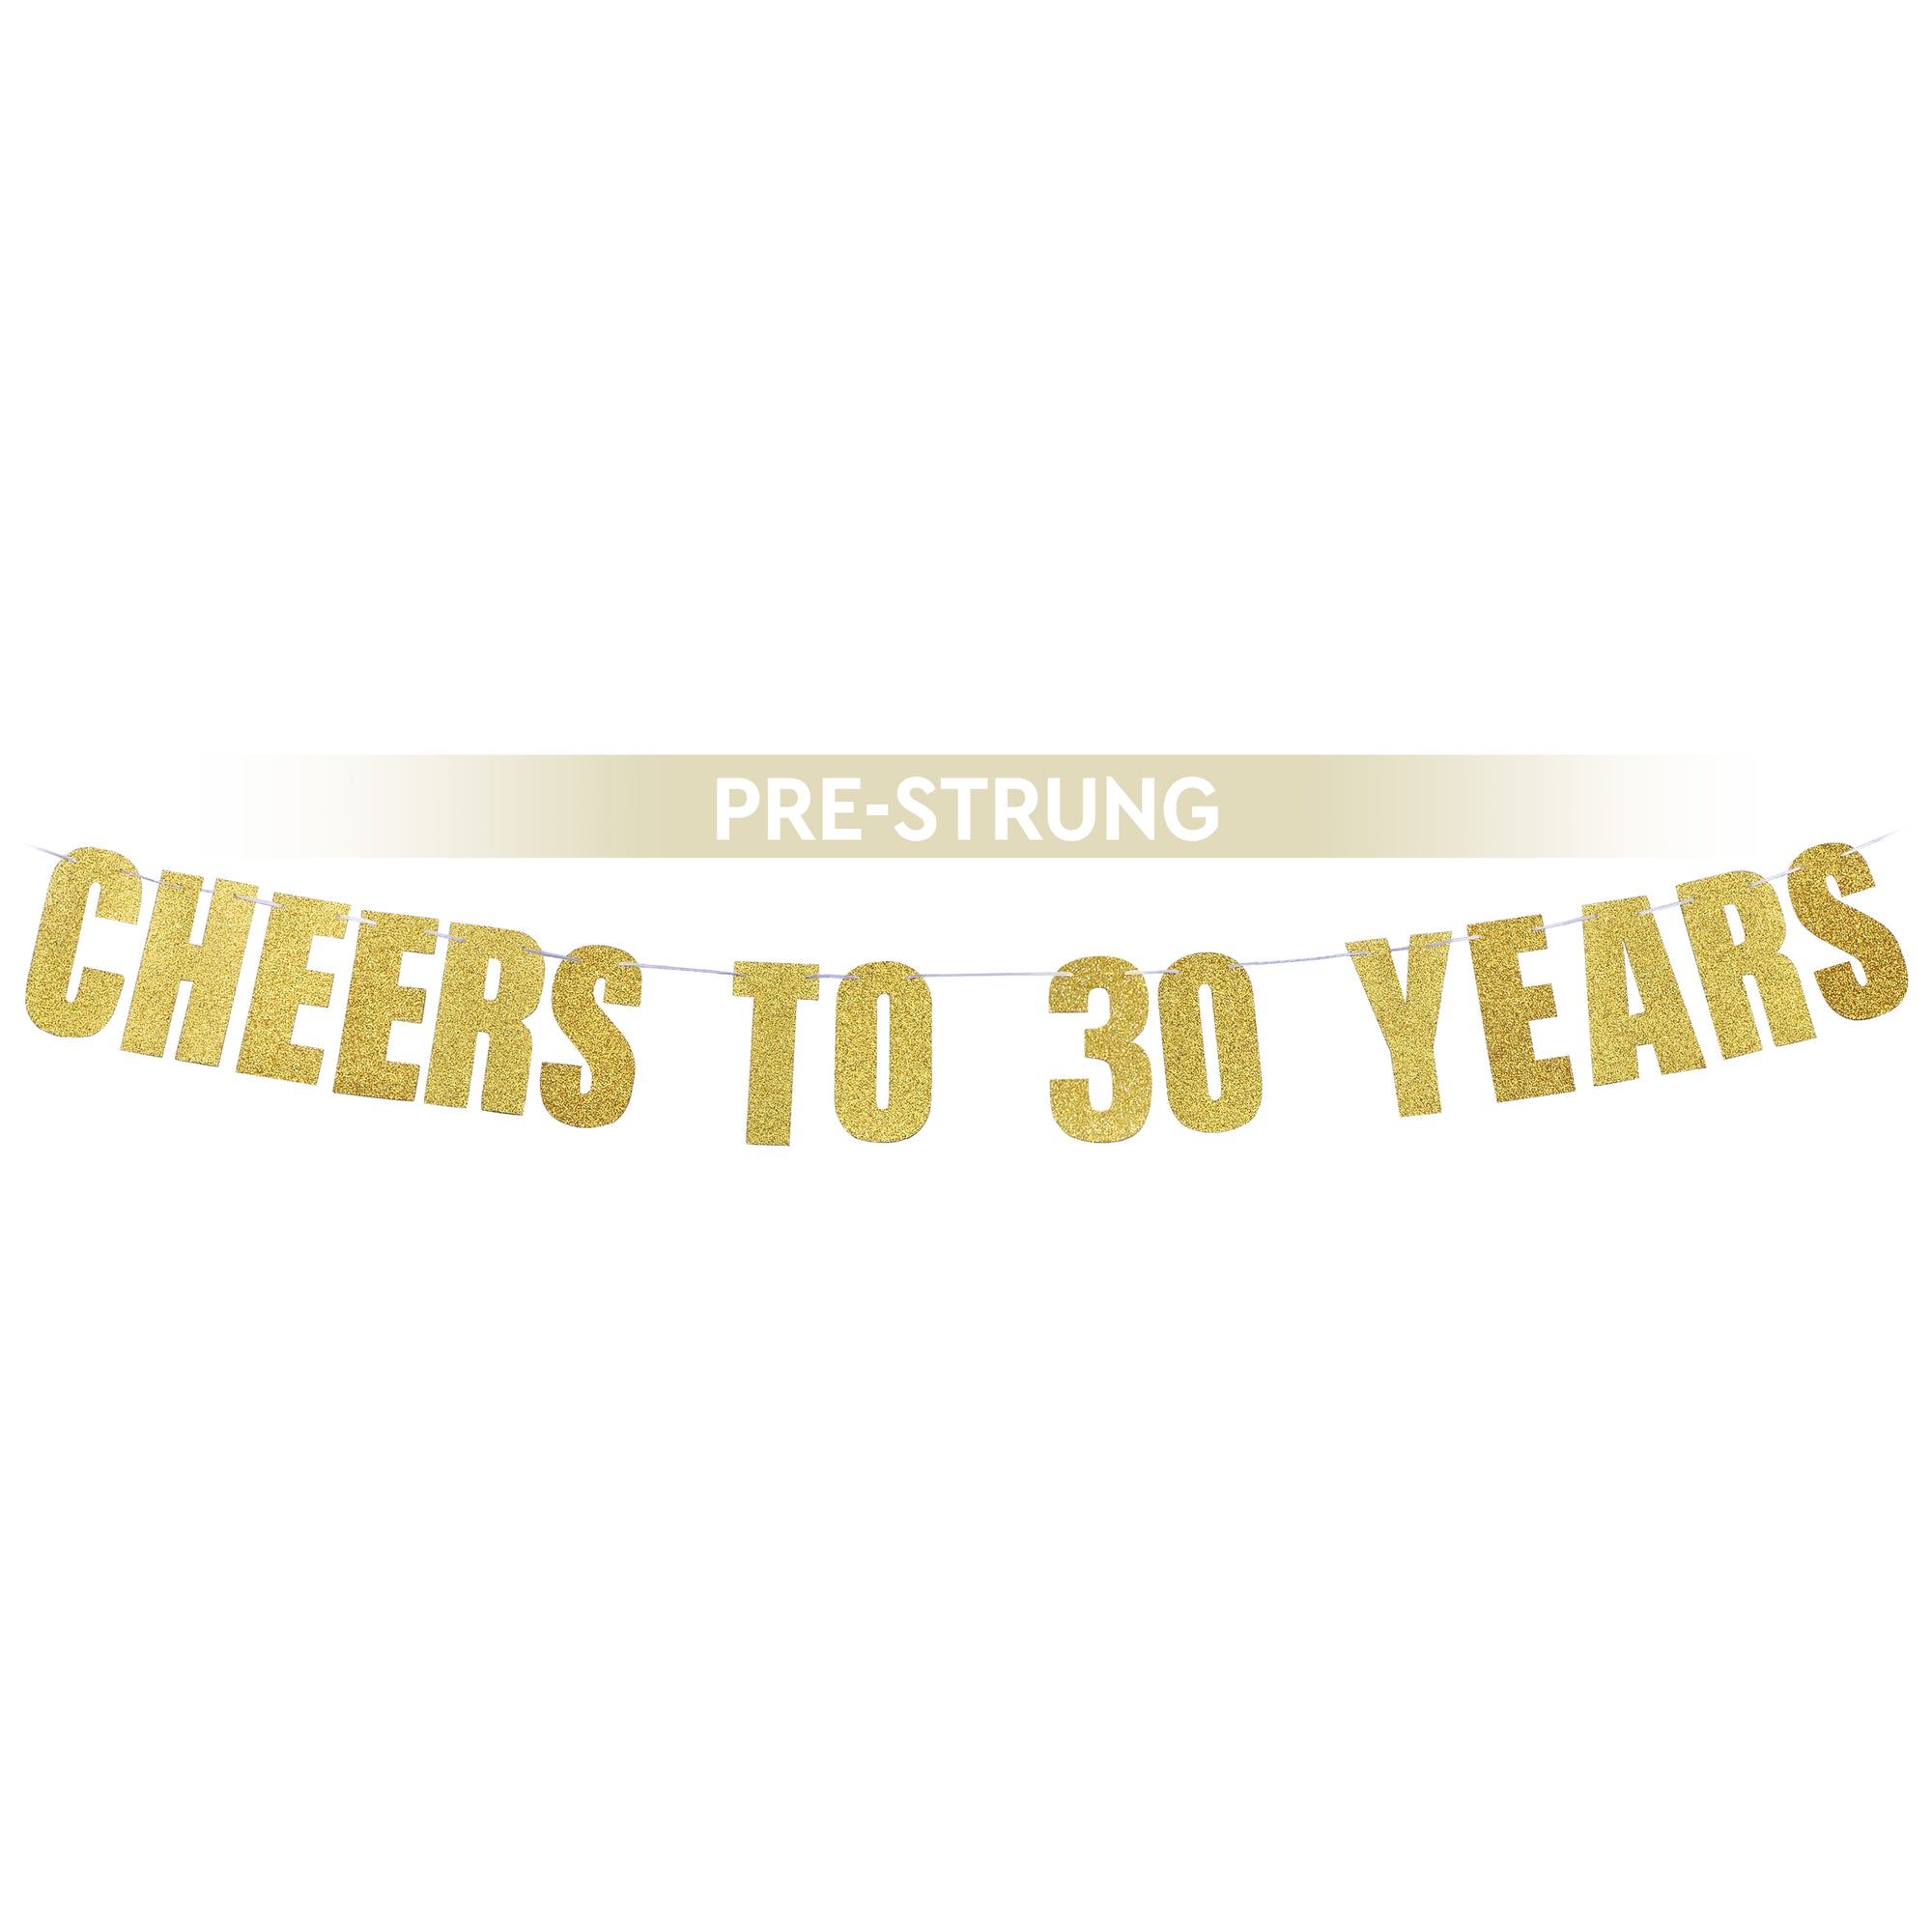 Cheers To 30 Years Banner (Pre-strung)